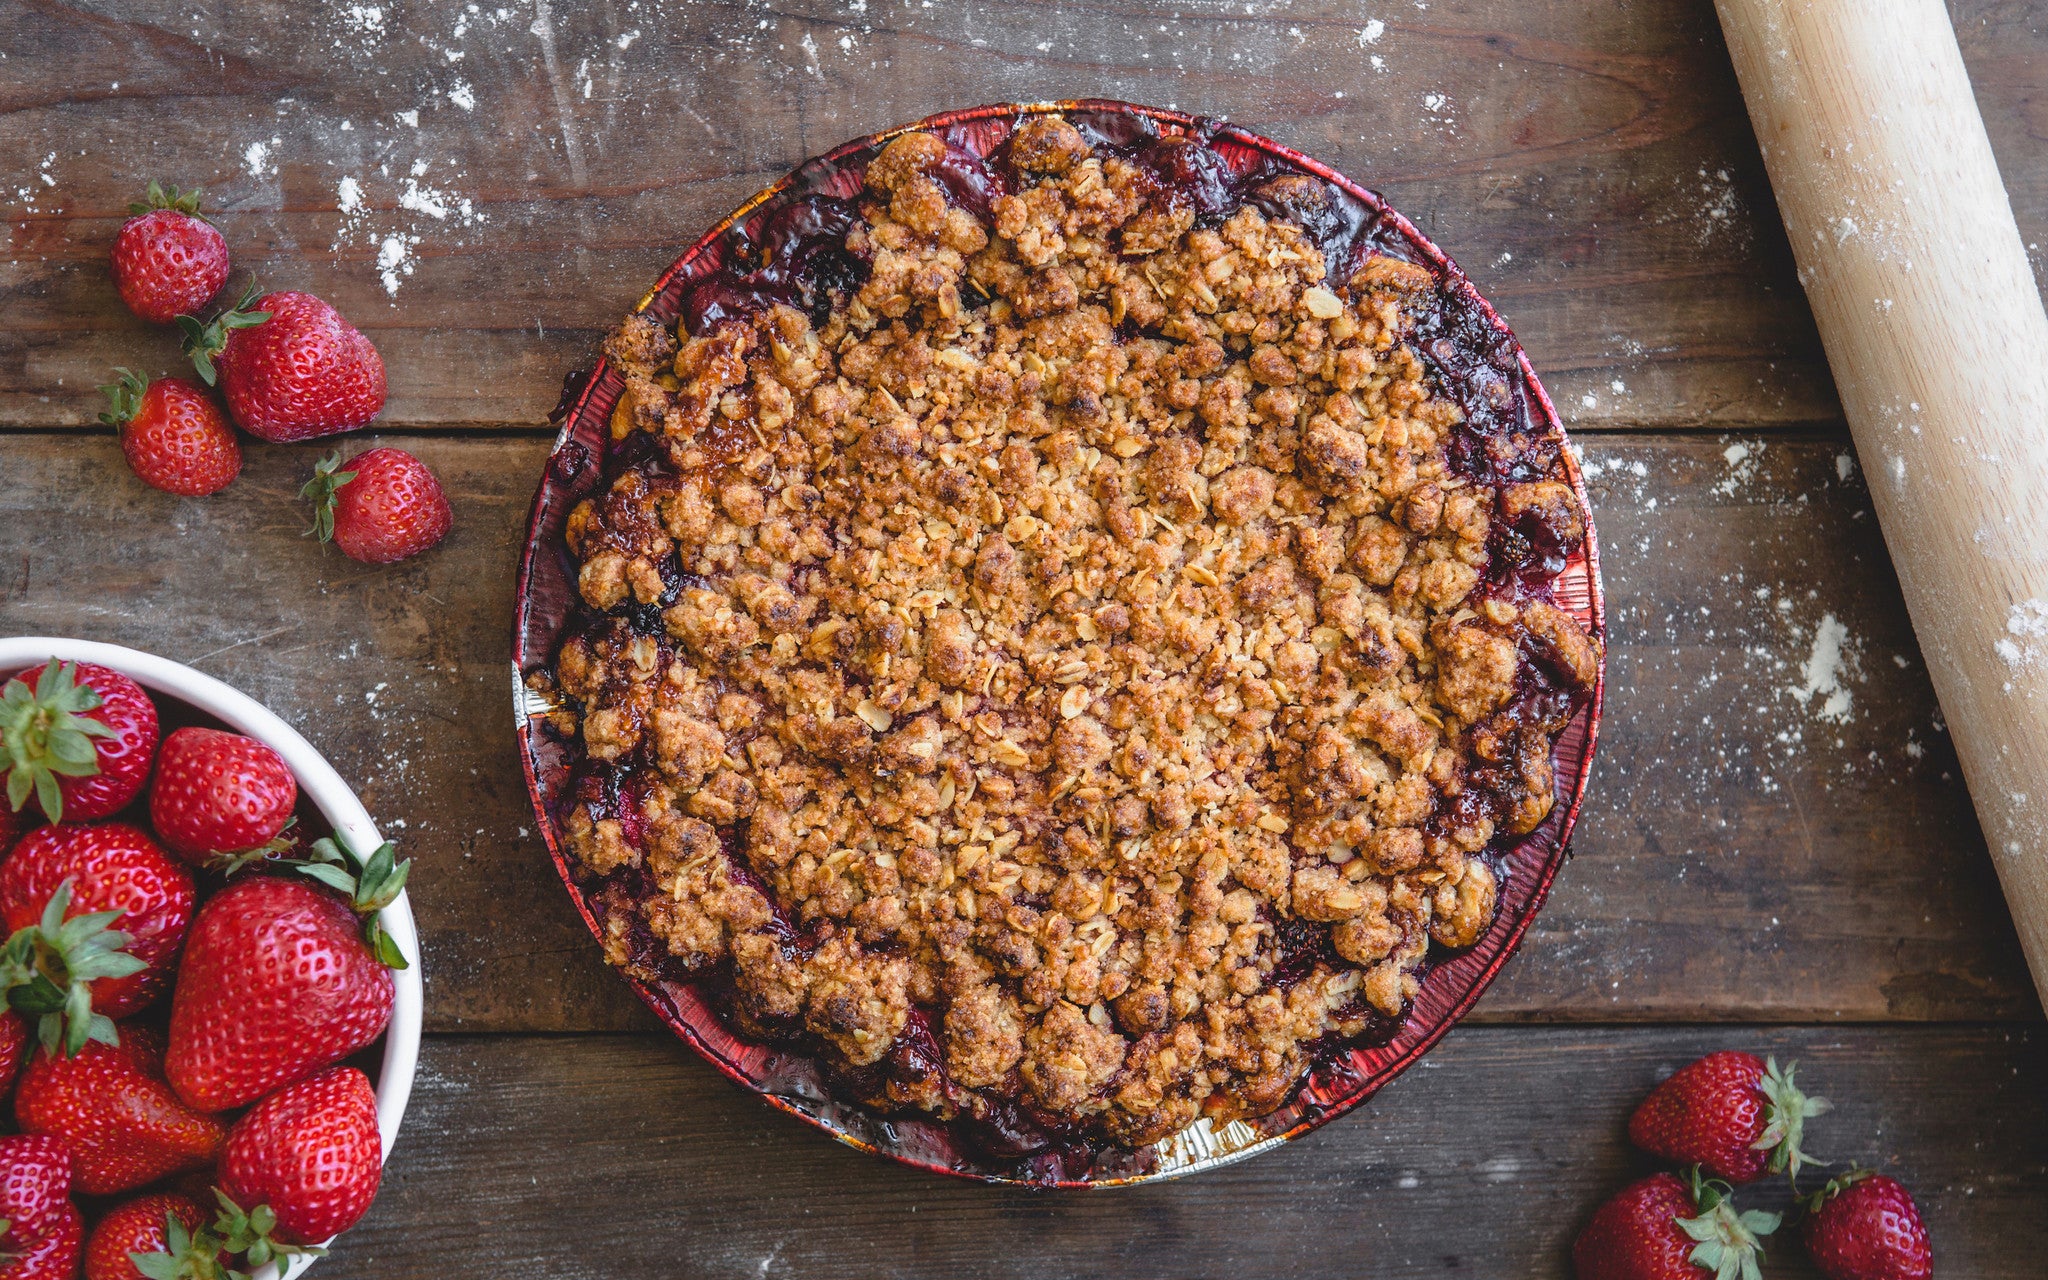 6" Strawberry Rhubarb Crumble (pre-order only)